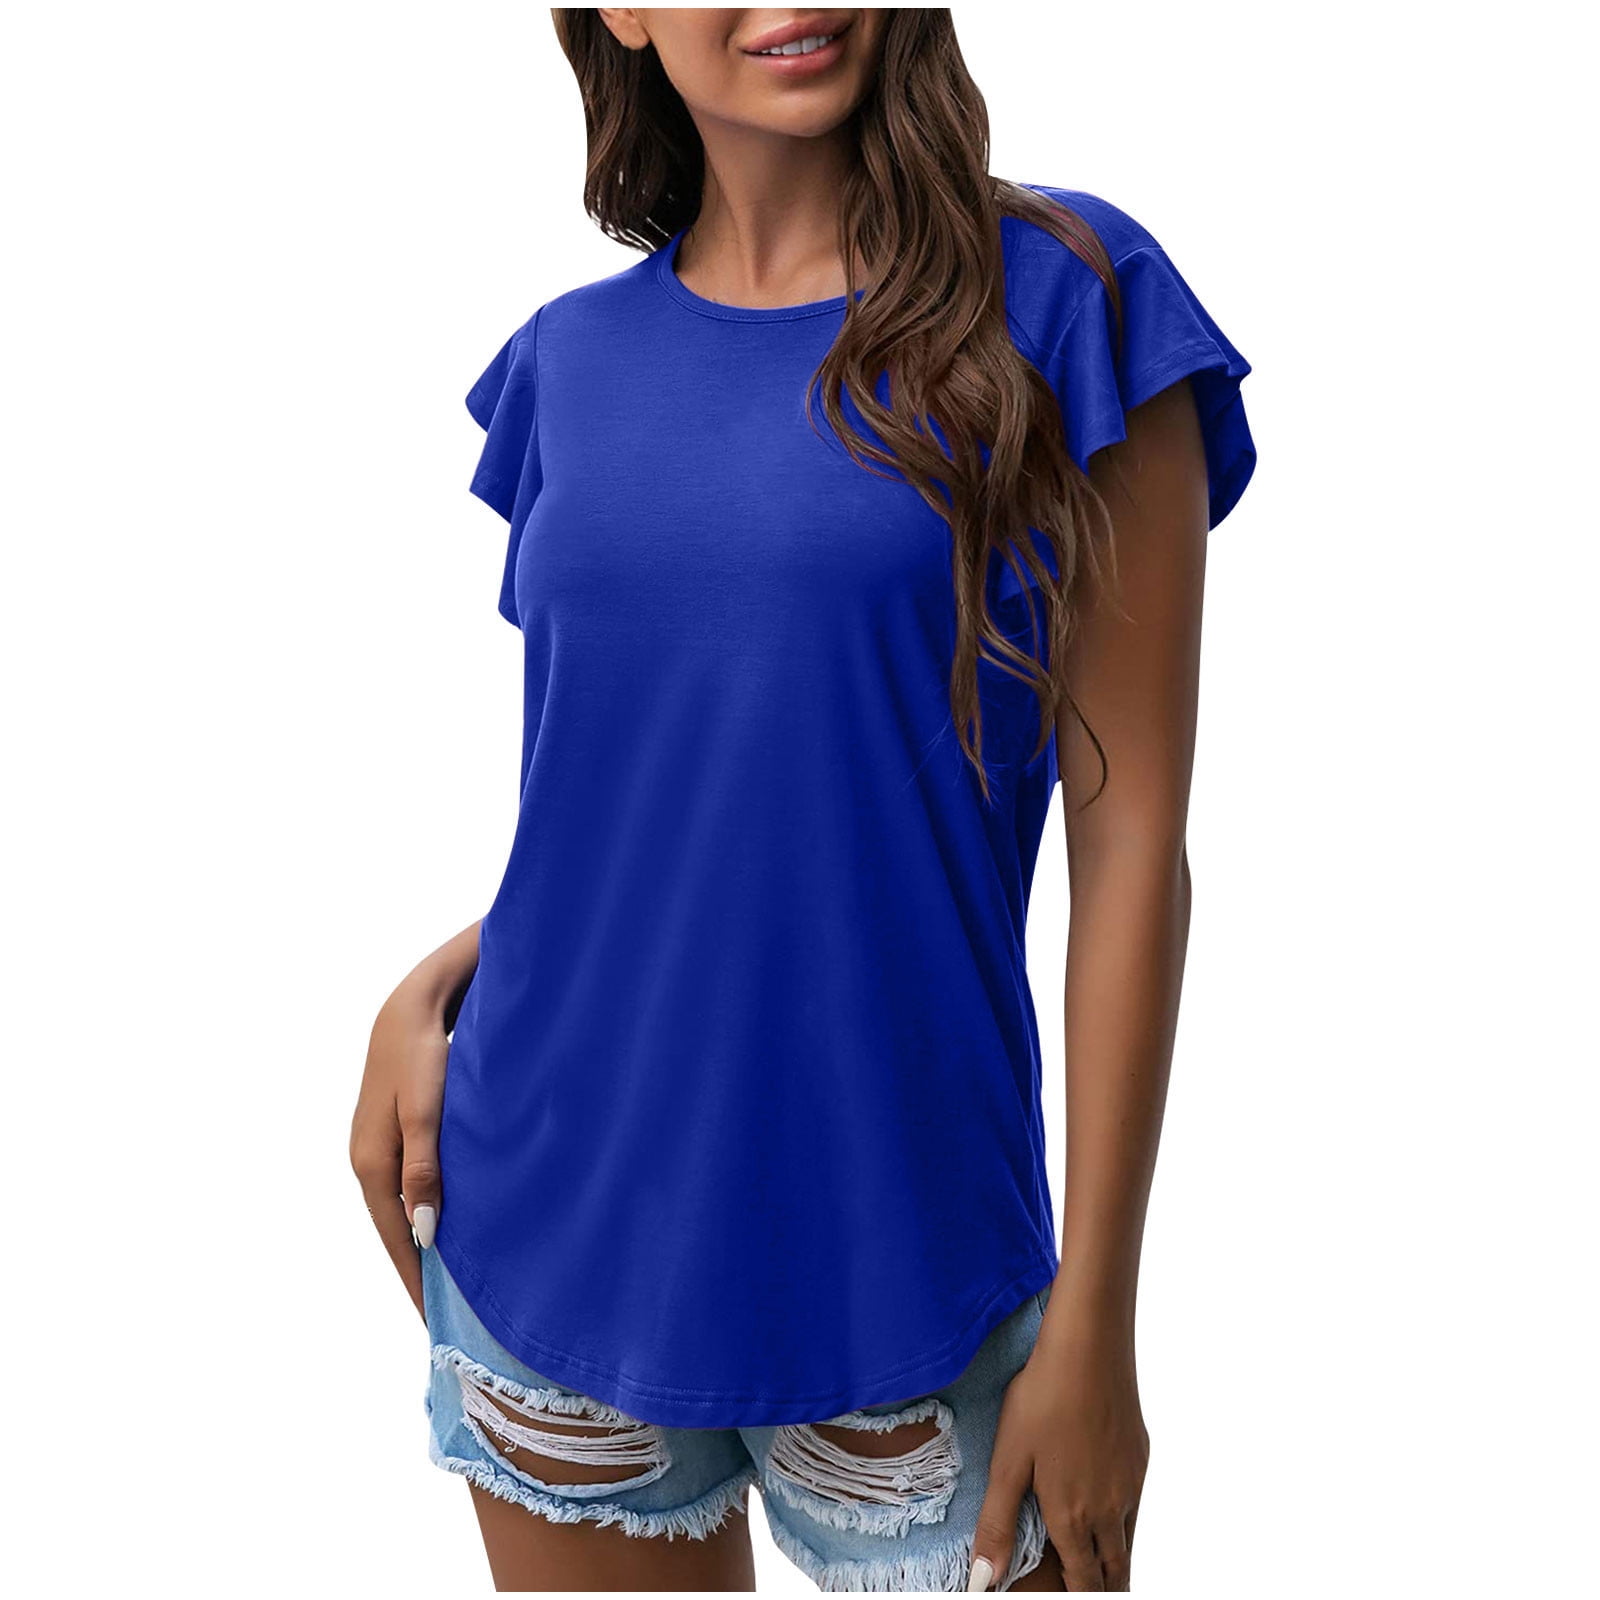 RQYYD Clearance Womens Short Sleeve Tops Casual Ruffle V Neck T